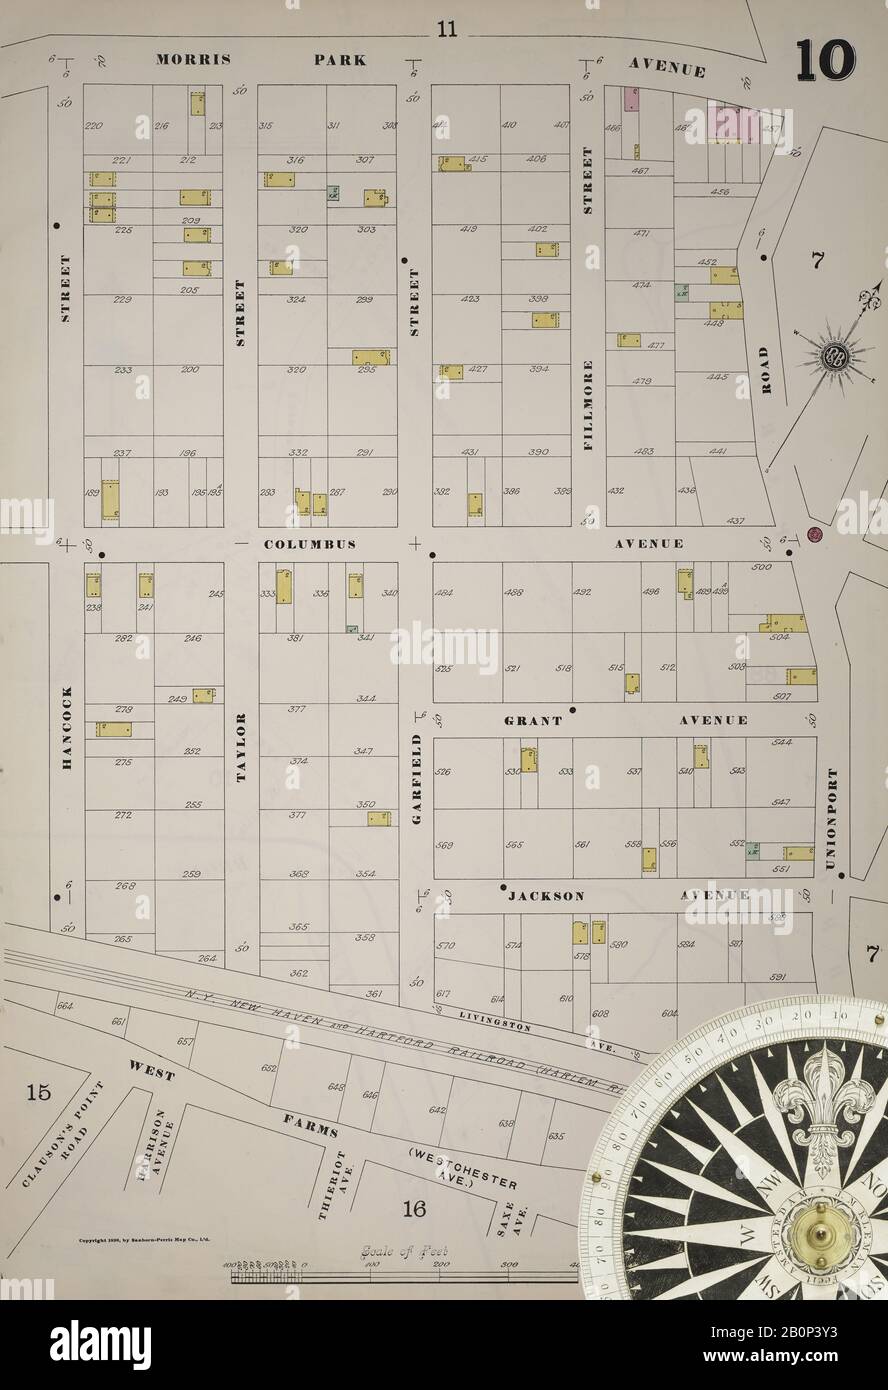 Image 11 of Sanborn Fire Insurance Map from New York, Bronx, Manhattan, New York. 1890 - 1902 Vol. A, 1898. 71 Sheet(s). Key map to edition. Bound, America, street map with a Nineteenth Century compass Stock Photo